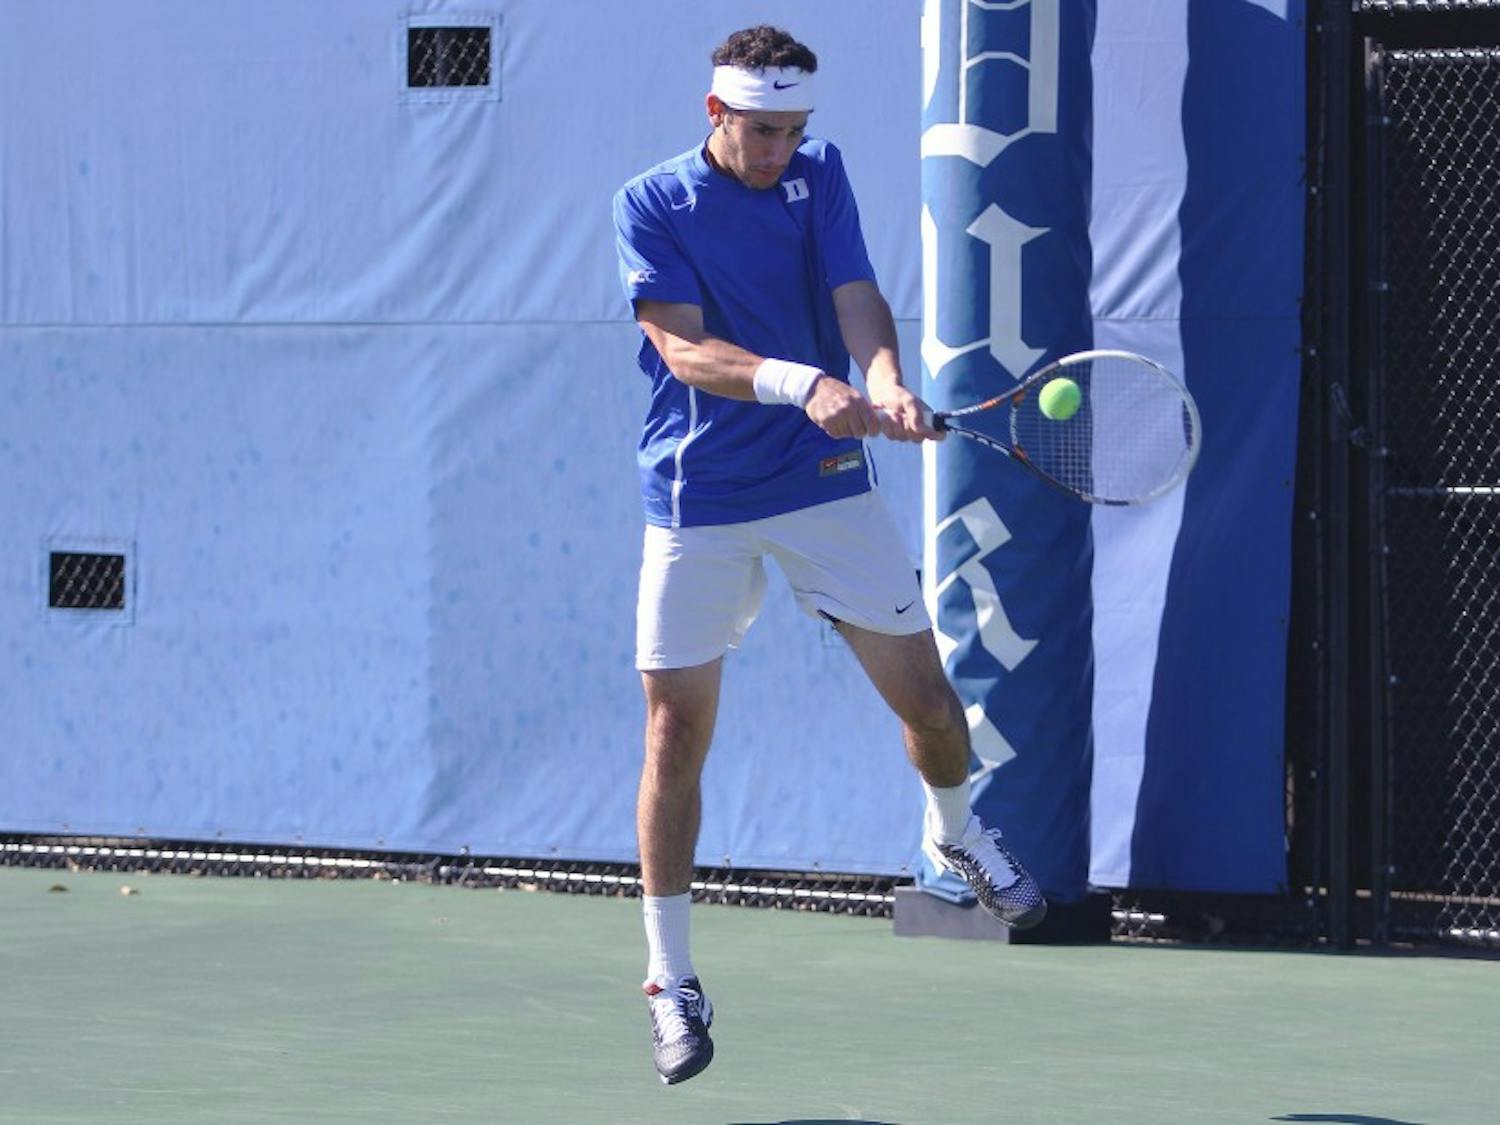 Snapping a five-match winning streak, Duke fell 4-3 to No. 2 Oklahoma in San Diego.